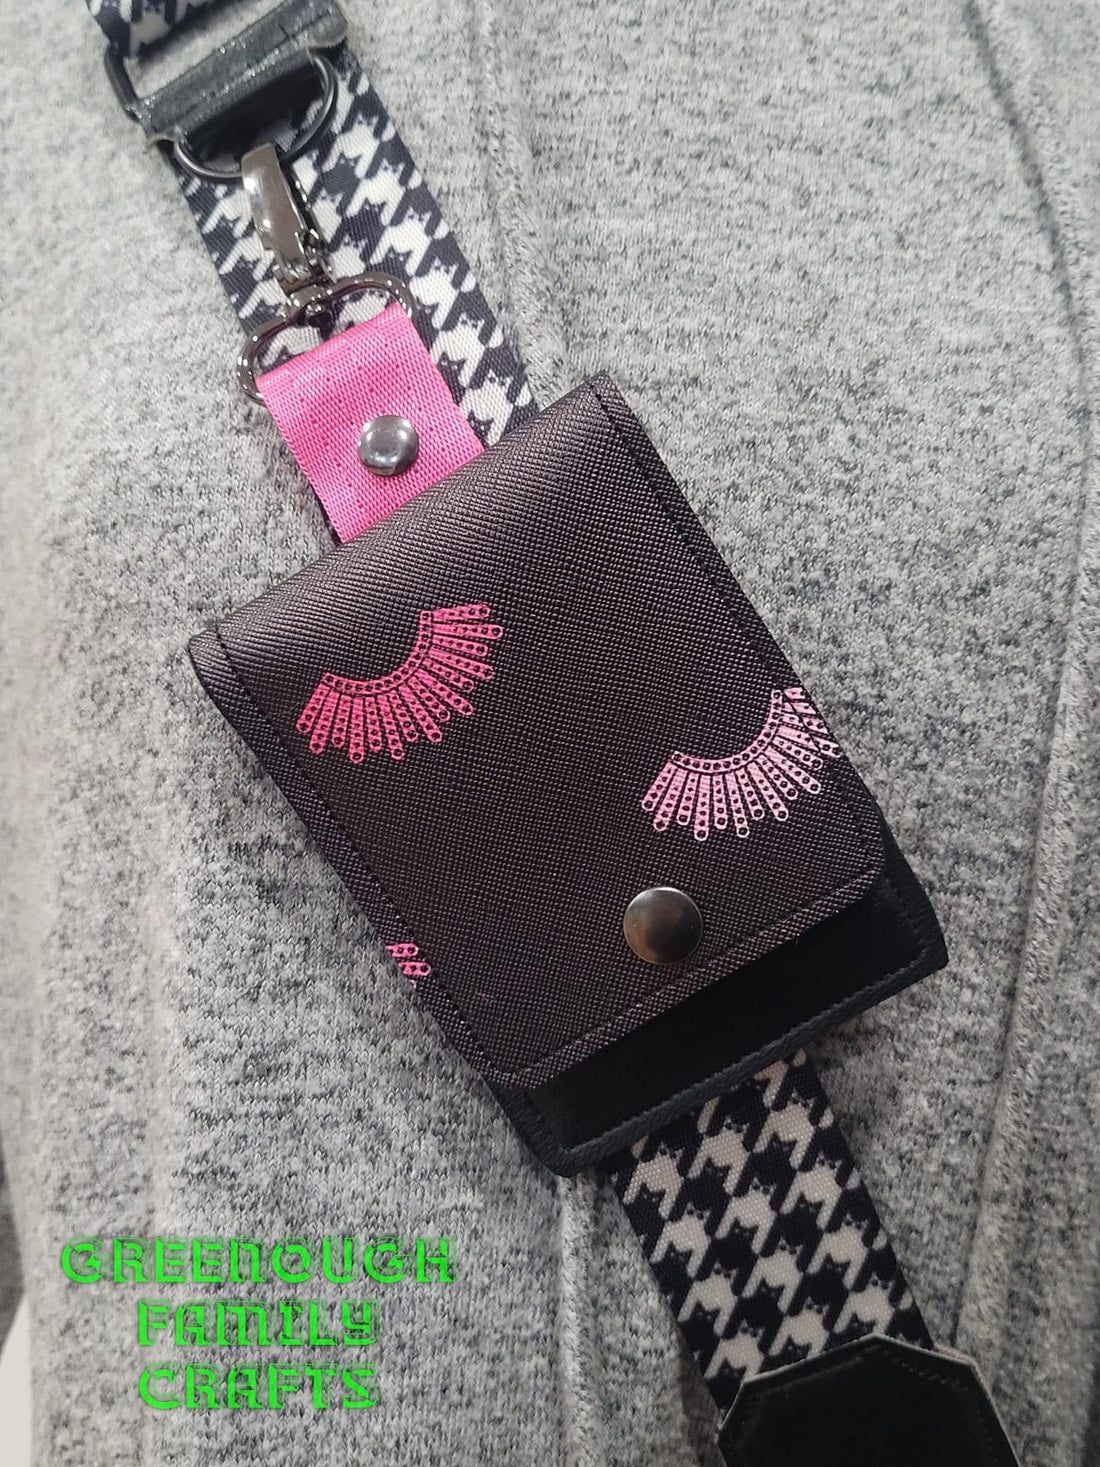 Lookma Wallet (a Charming Cheek Design) PDF Sewing Pattern (includes SVGs, A0 Files and video!)